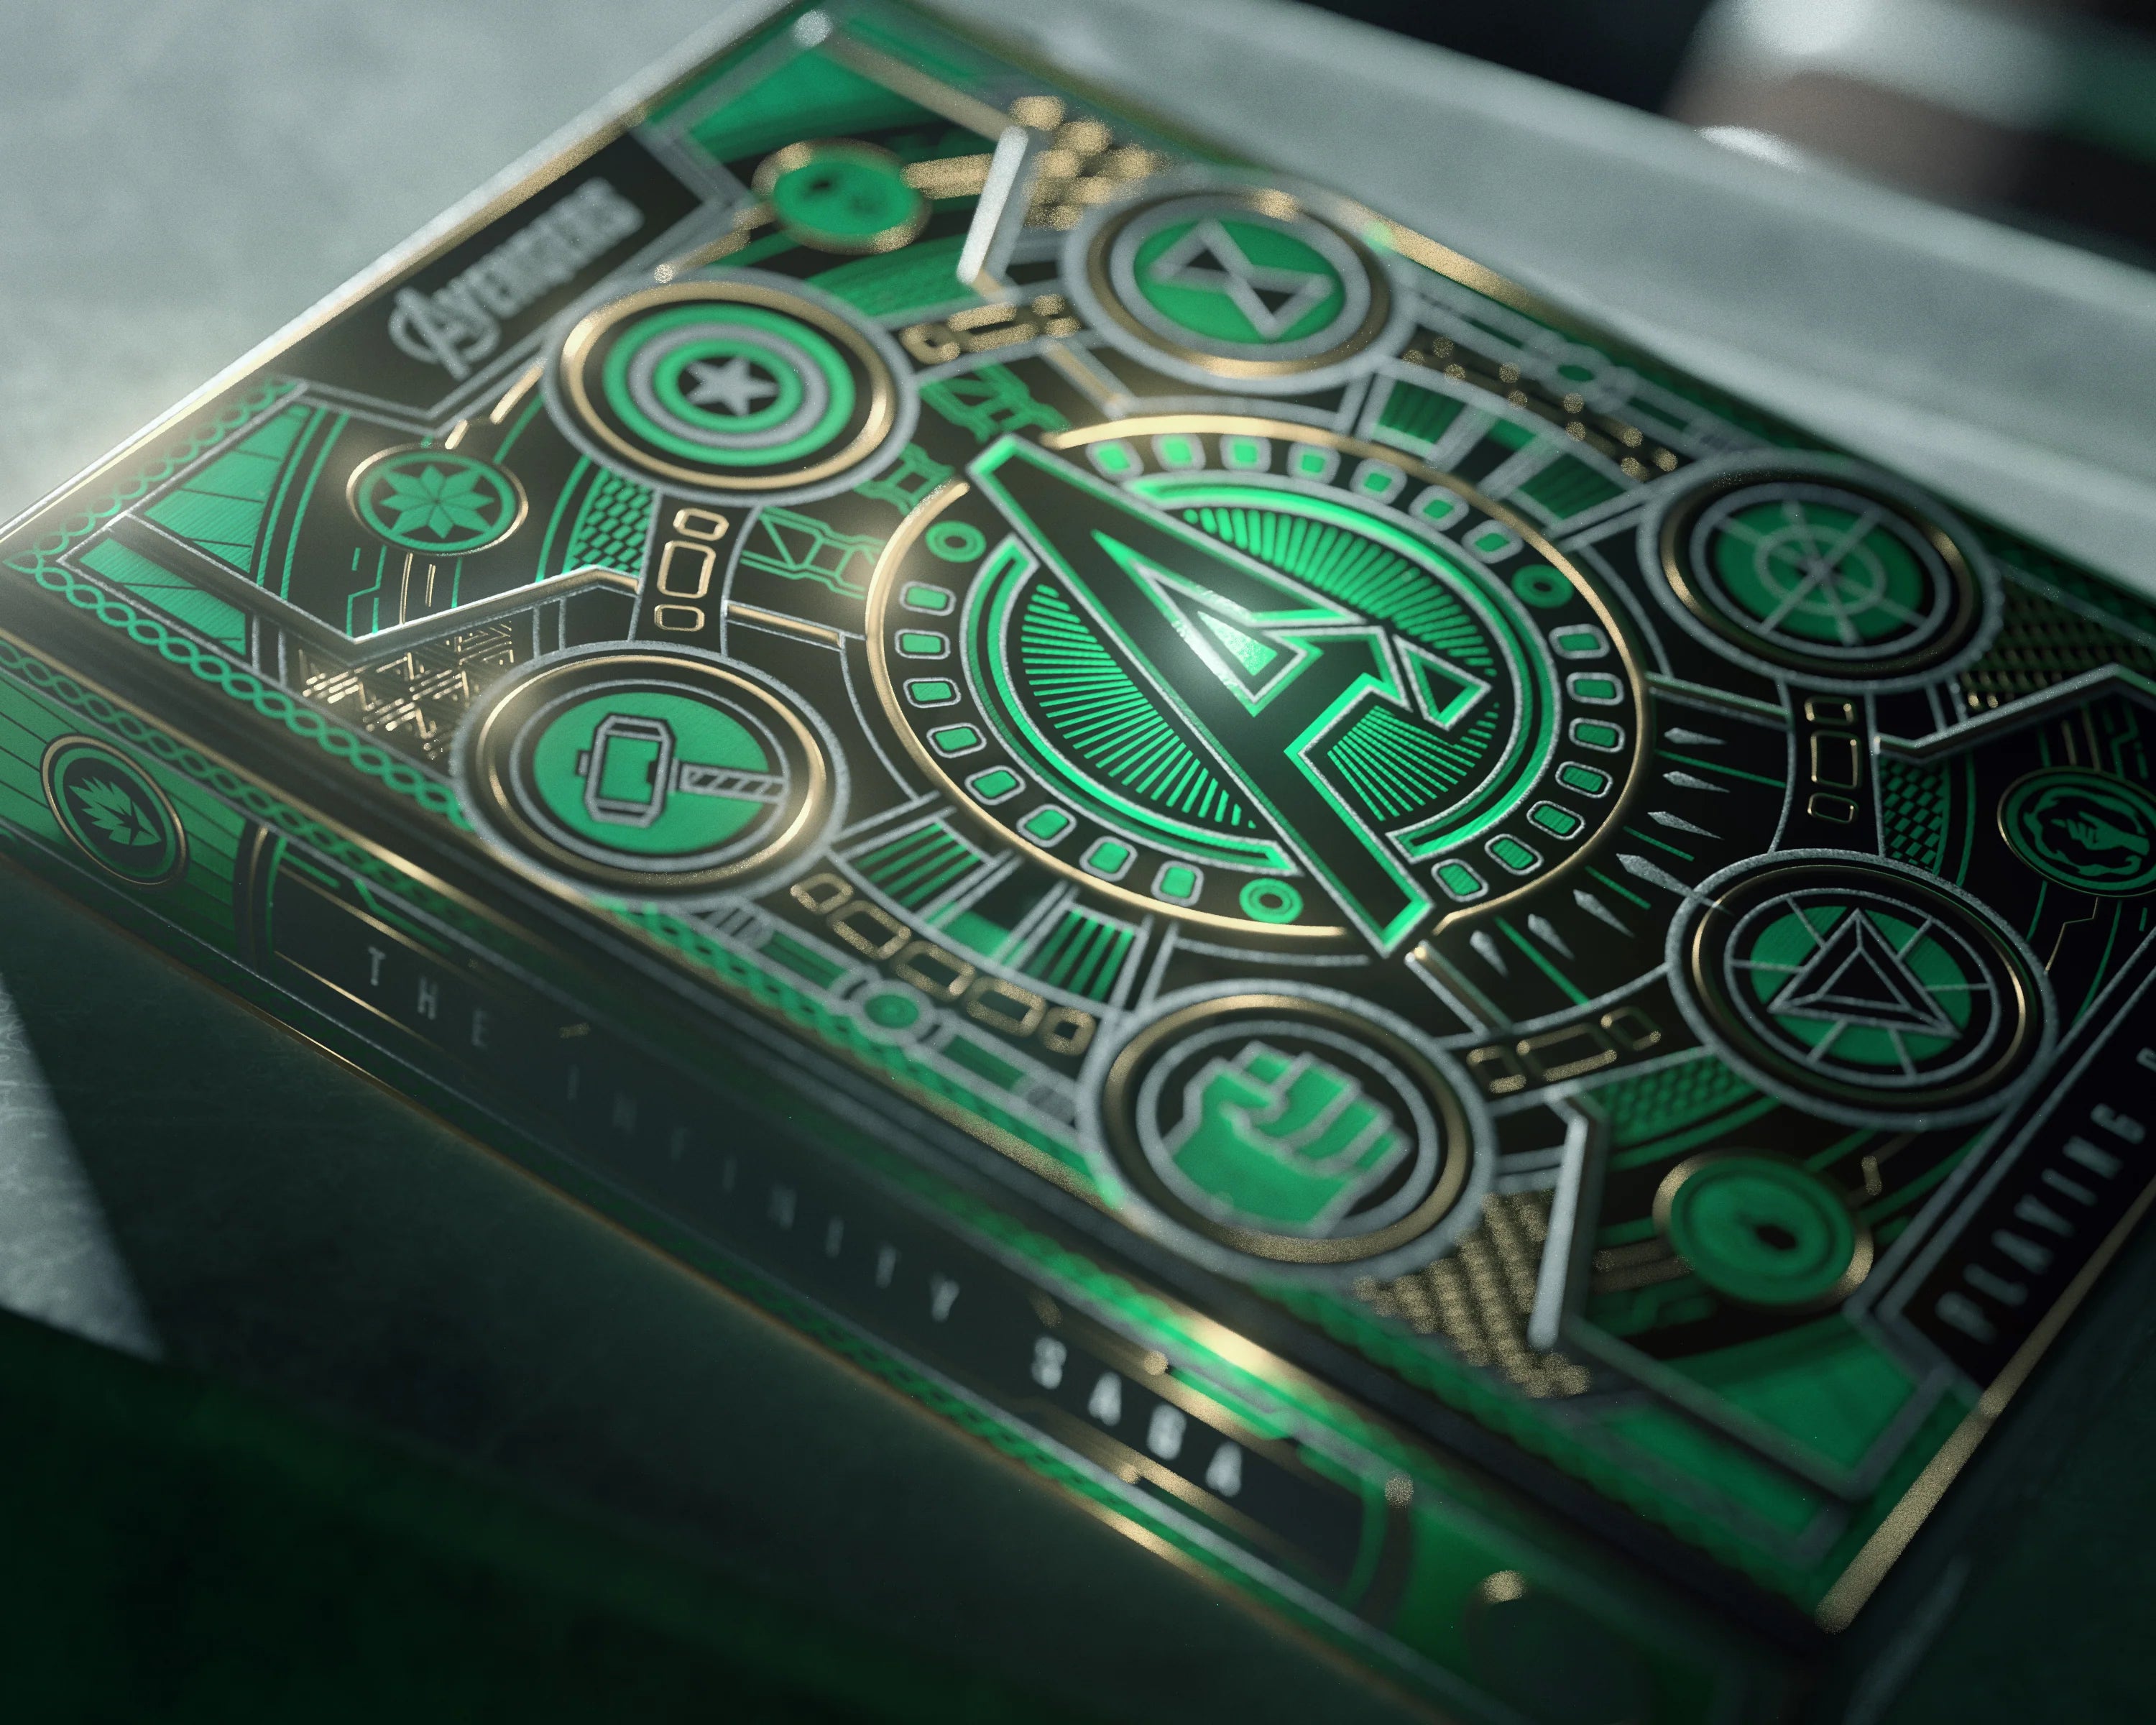 theory11 Playing Cards: Avengers